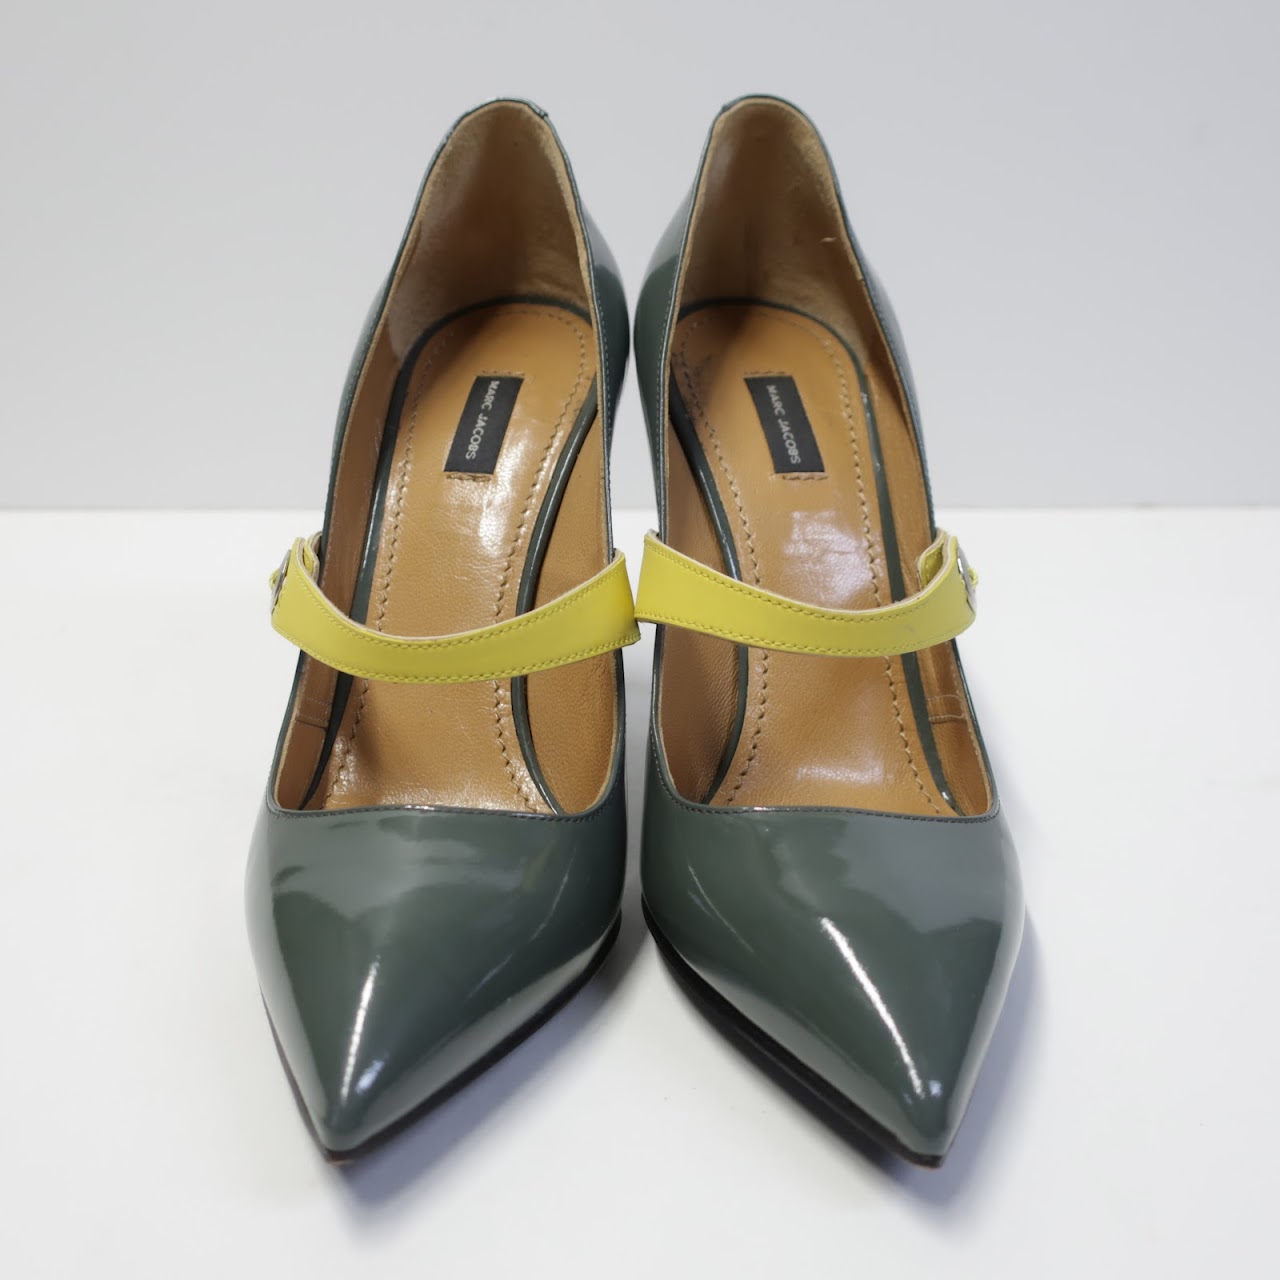 Marc Jacobs Patent Leather Mary Jane Pumps